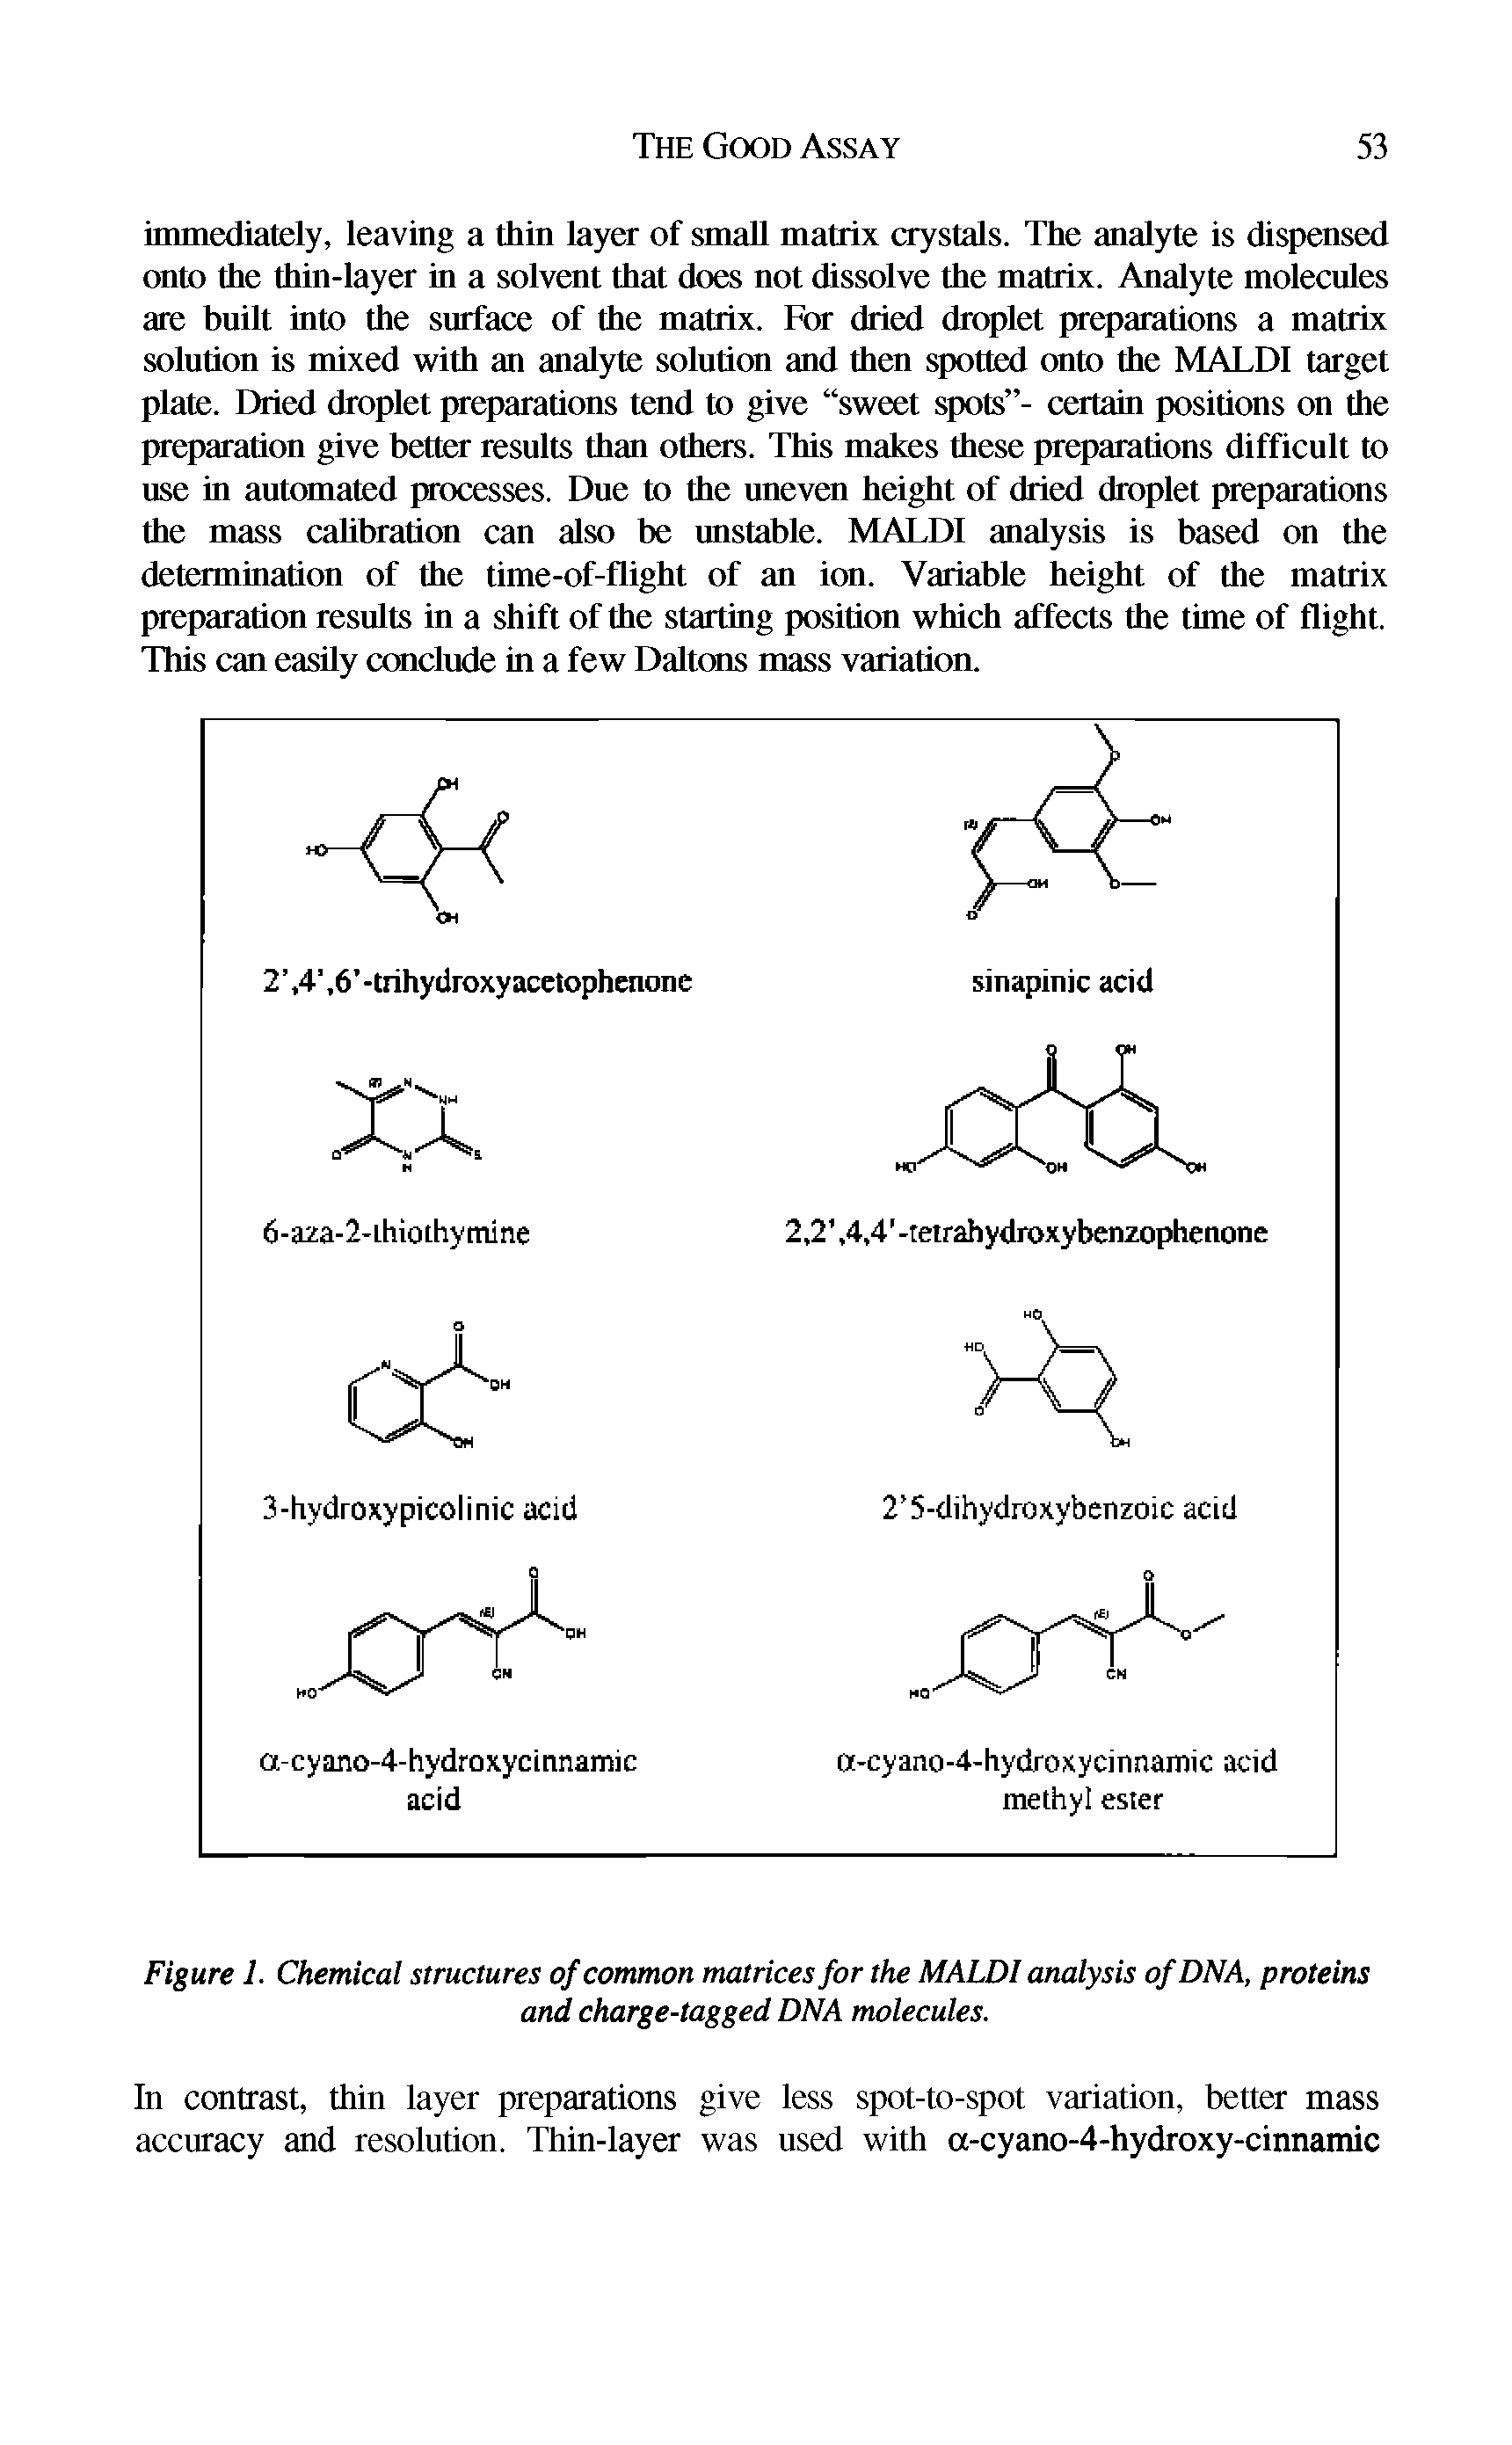 Figure 1. Chemical structures of common matrices for the MALDl analysis of DMA, proteins and charge-tagged DNA molecules.